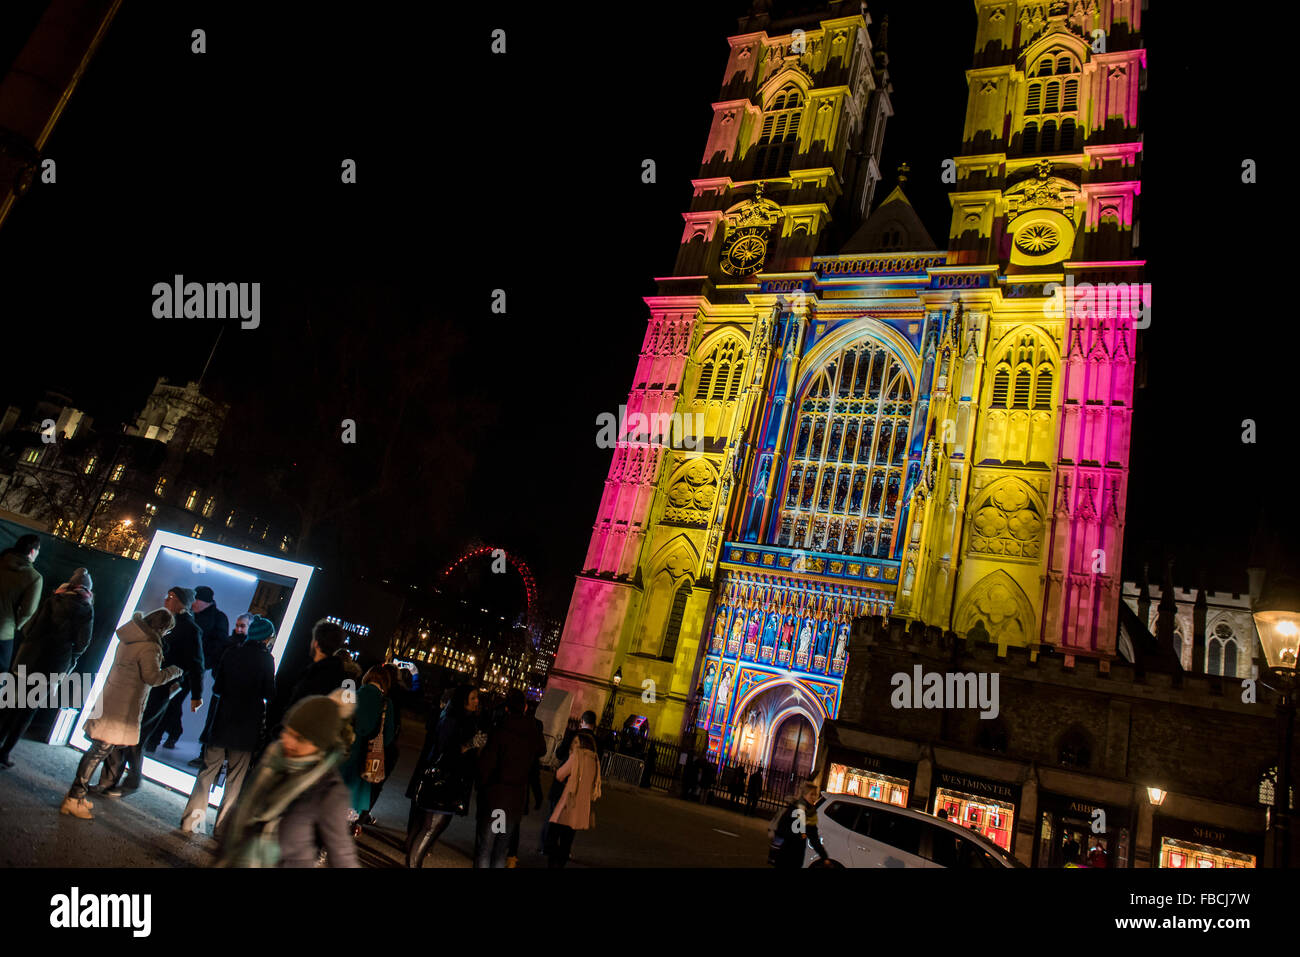 London, UK. 14th January, 2016. The viewing box of The Light of The Spirit by Patrice Warrener at Westminster Abbey - Lumiere London: the ‘biggest-ever’ light festival to hit the capital.  Produced by Artichoke and supported by the Mayor of London, for four evenings in January a host of international artists illuminate the city from 6:30pm to 10:30pm each night.  Iconic architecture has been transformed with 3D projections, interactive installations and other extraordinary light works. Credit:  Guy Bell/Alamy Live News Stock Photo